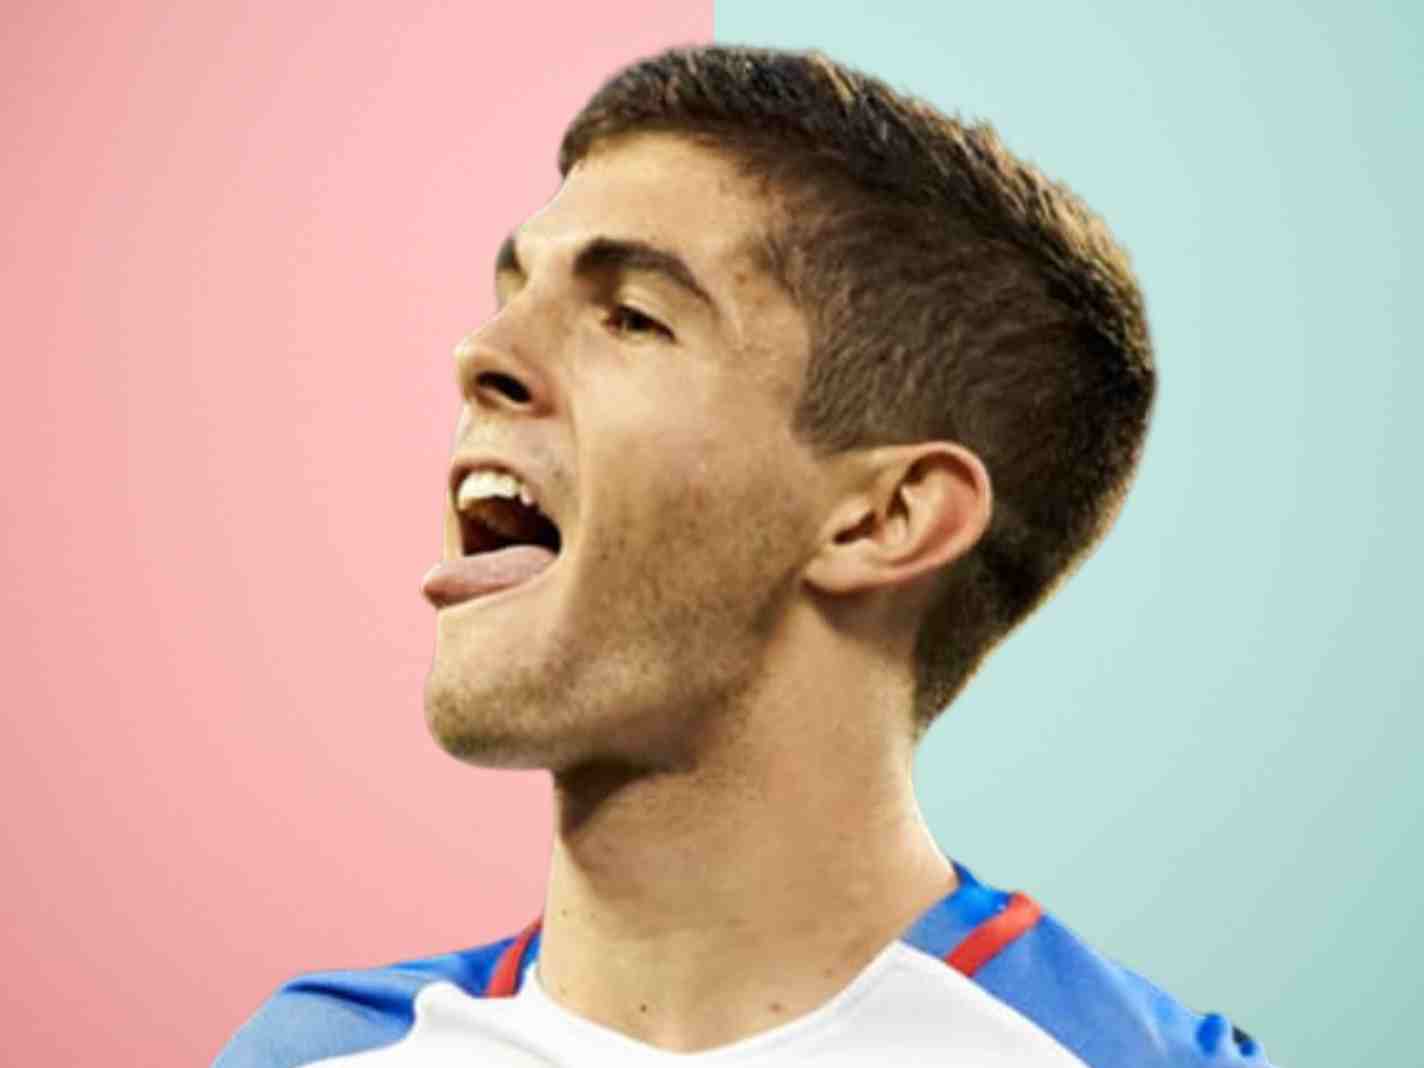 Christian Pulisic Caught Sending Racy Snapchat Messages To Mystery Woman